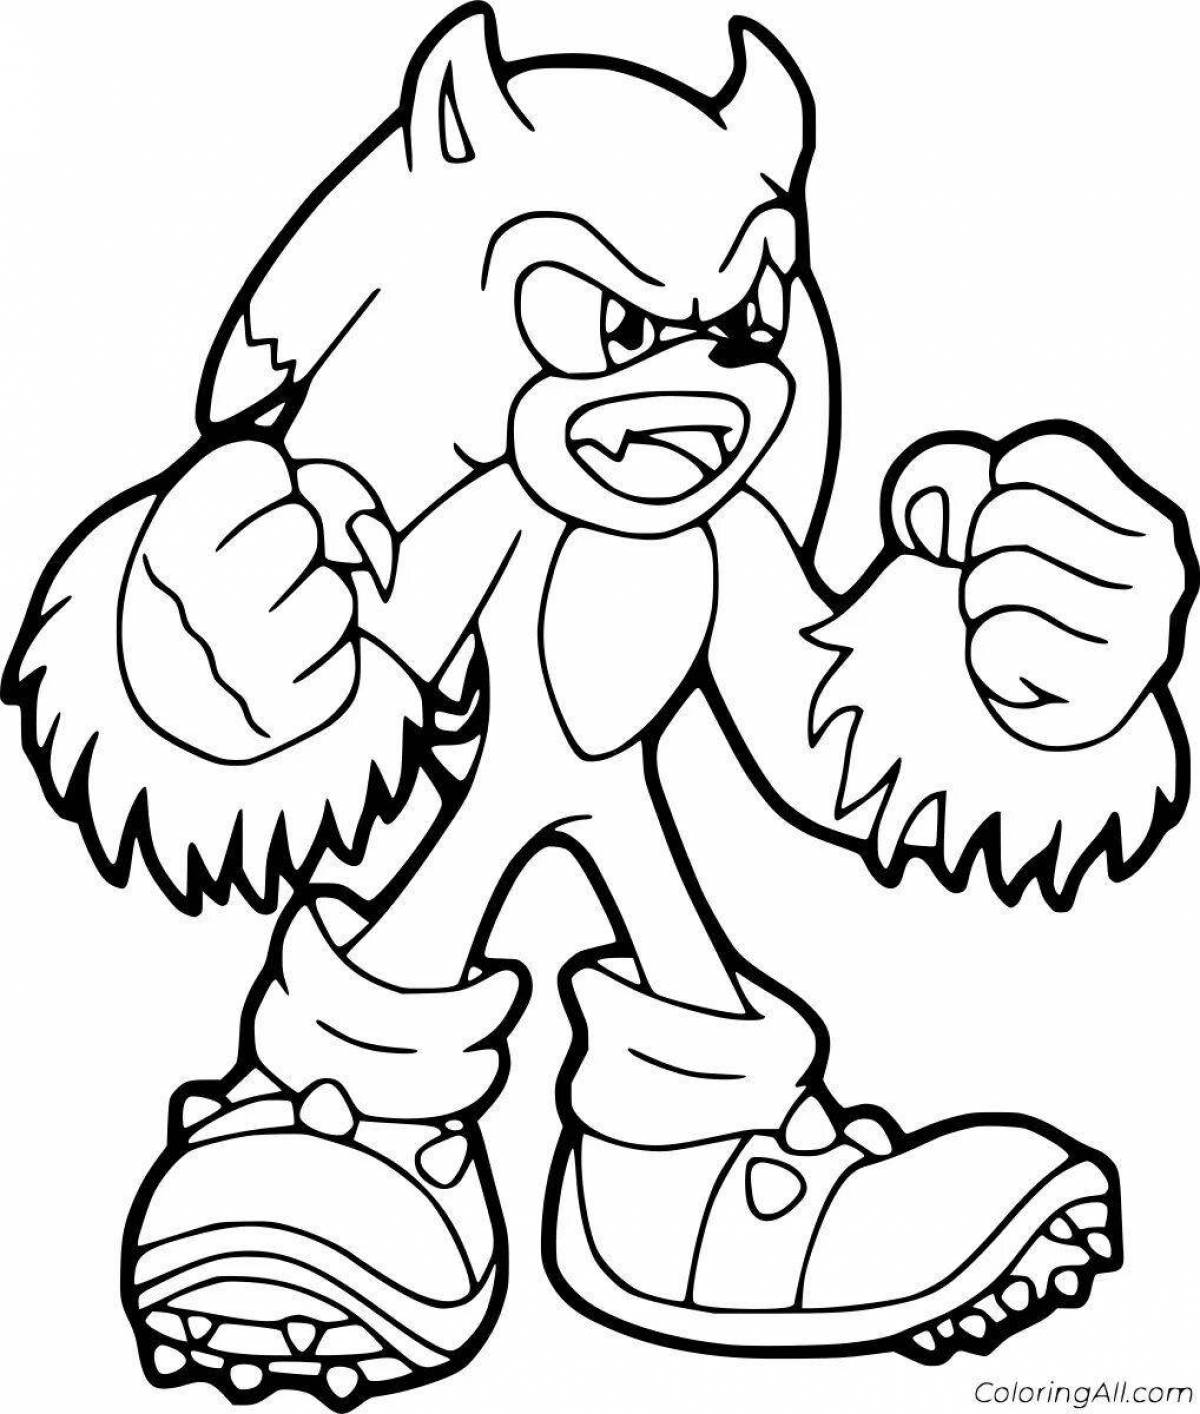 Coloring evil sonic - malicious